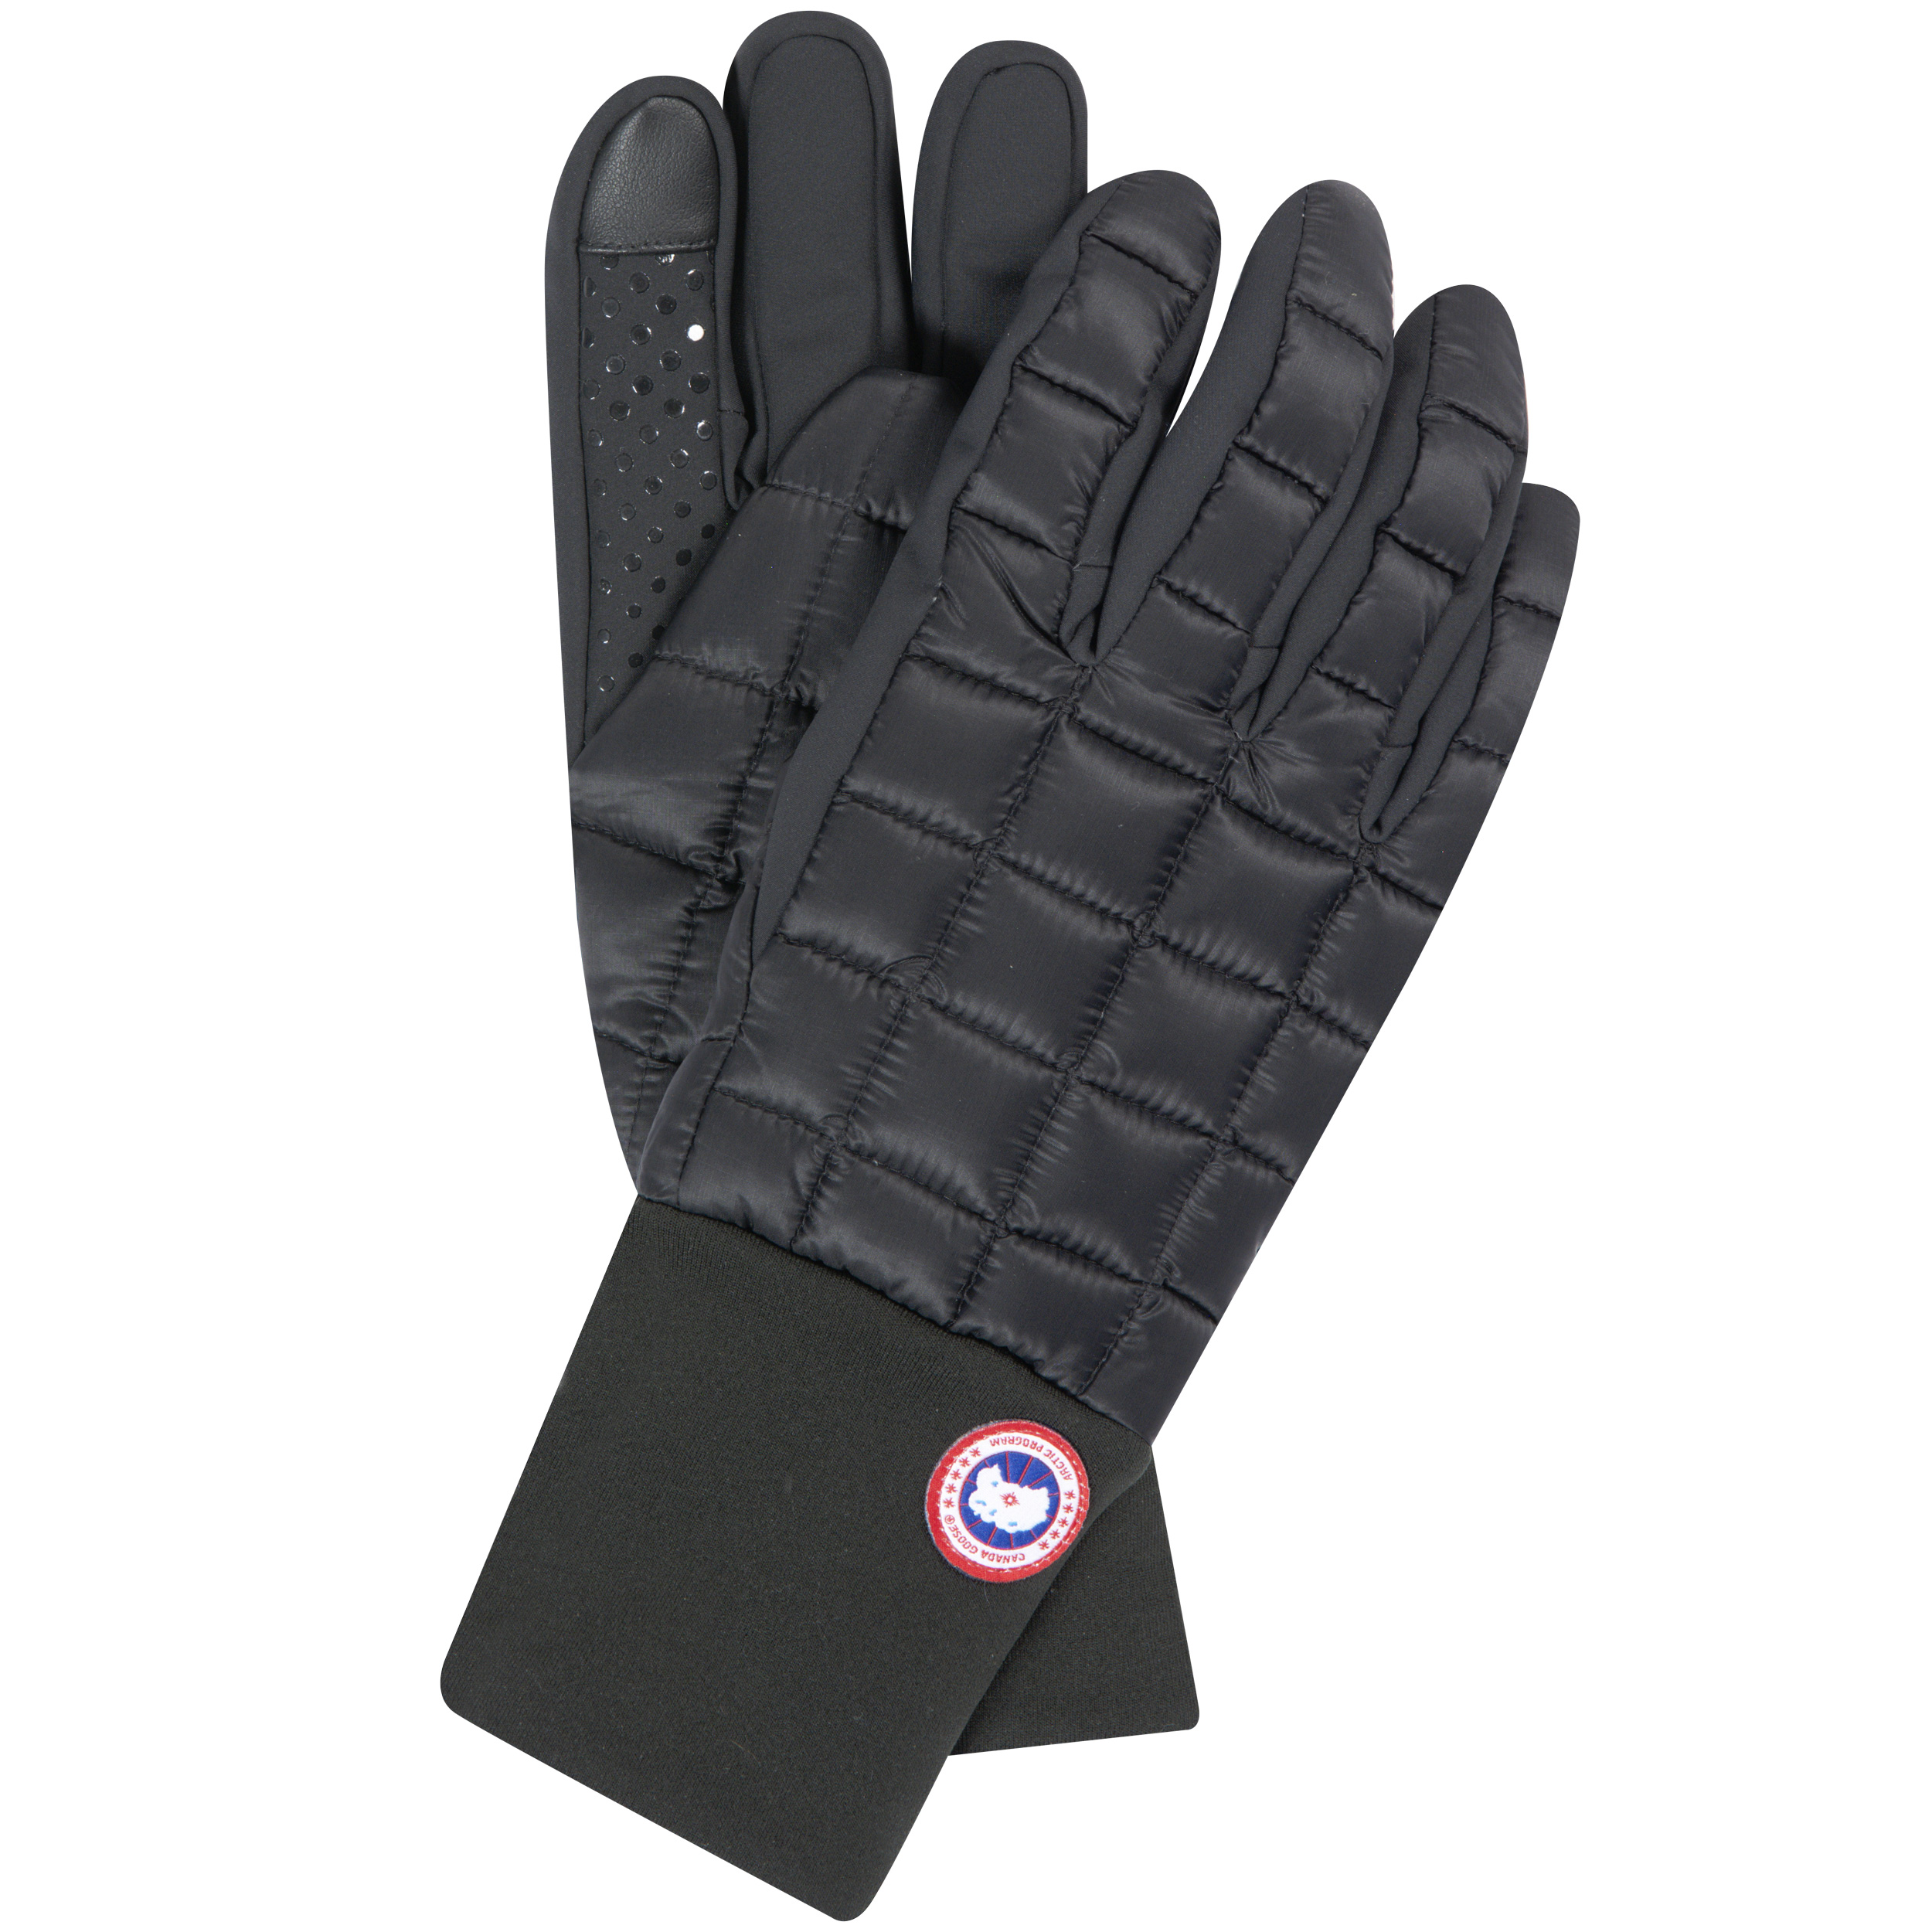 Canada Goose ’Northern’ Glove Liners Black